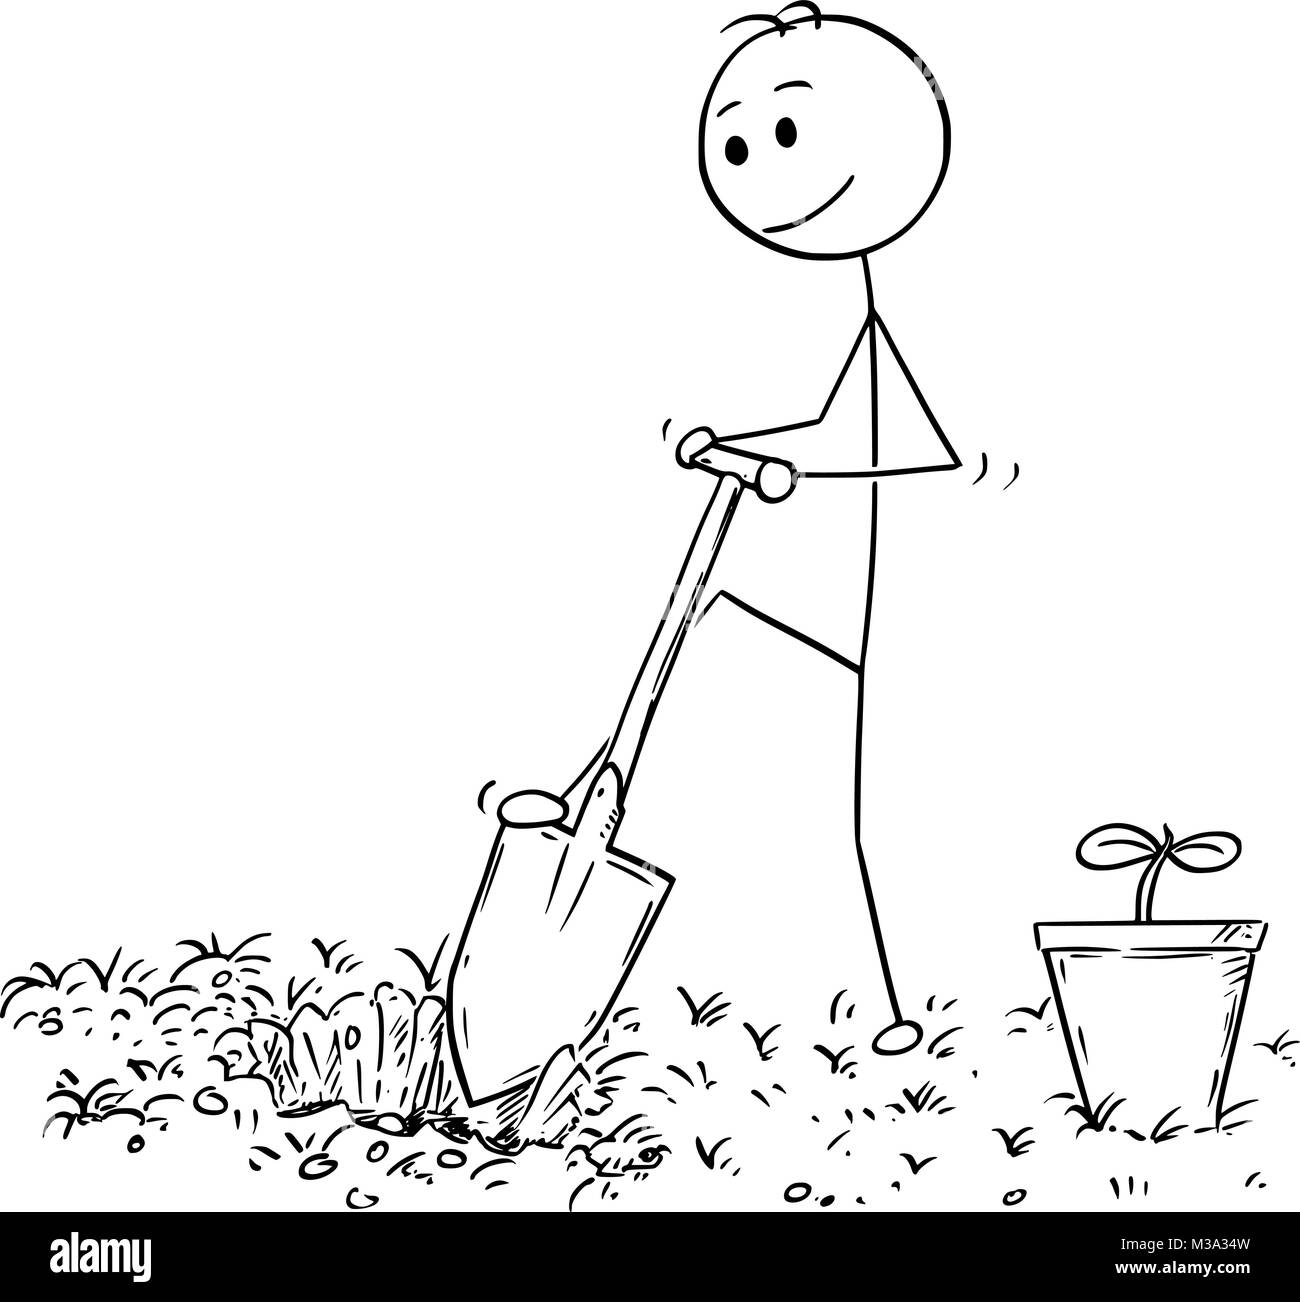 Cartoon of Gardener Digging a Hole for Plant Stock Vector